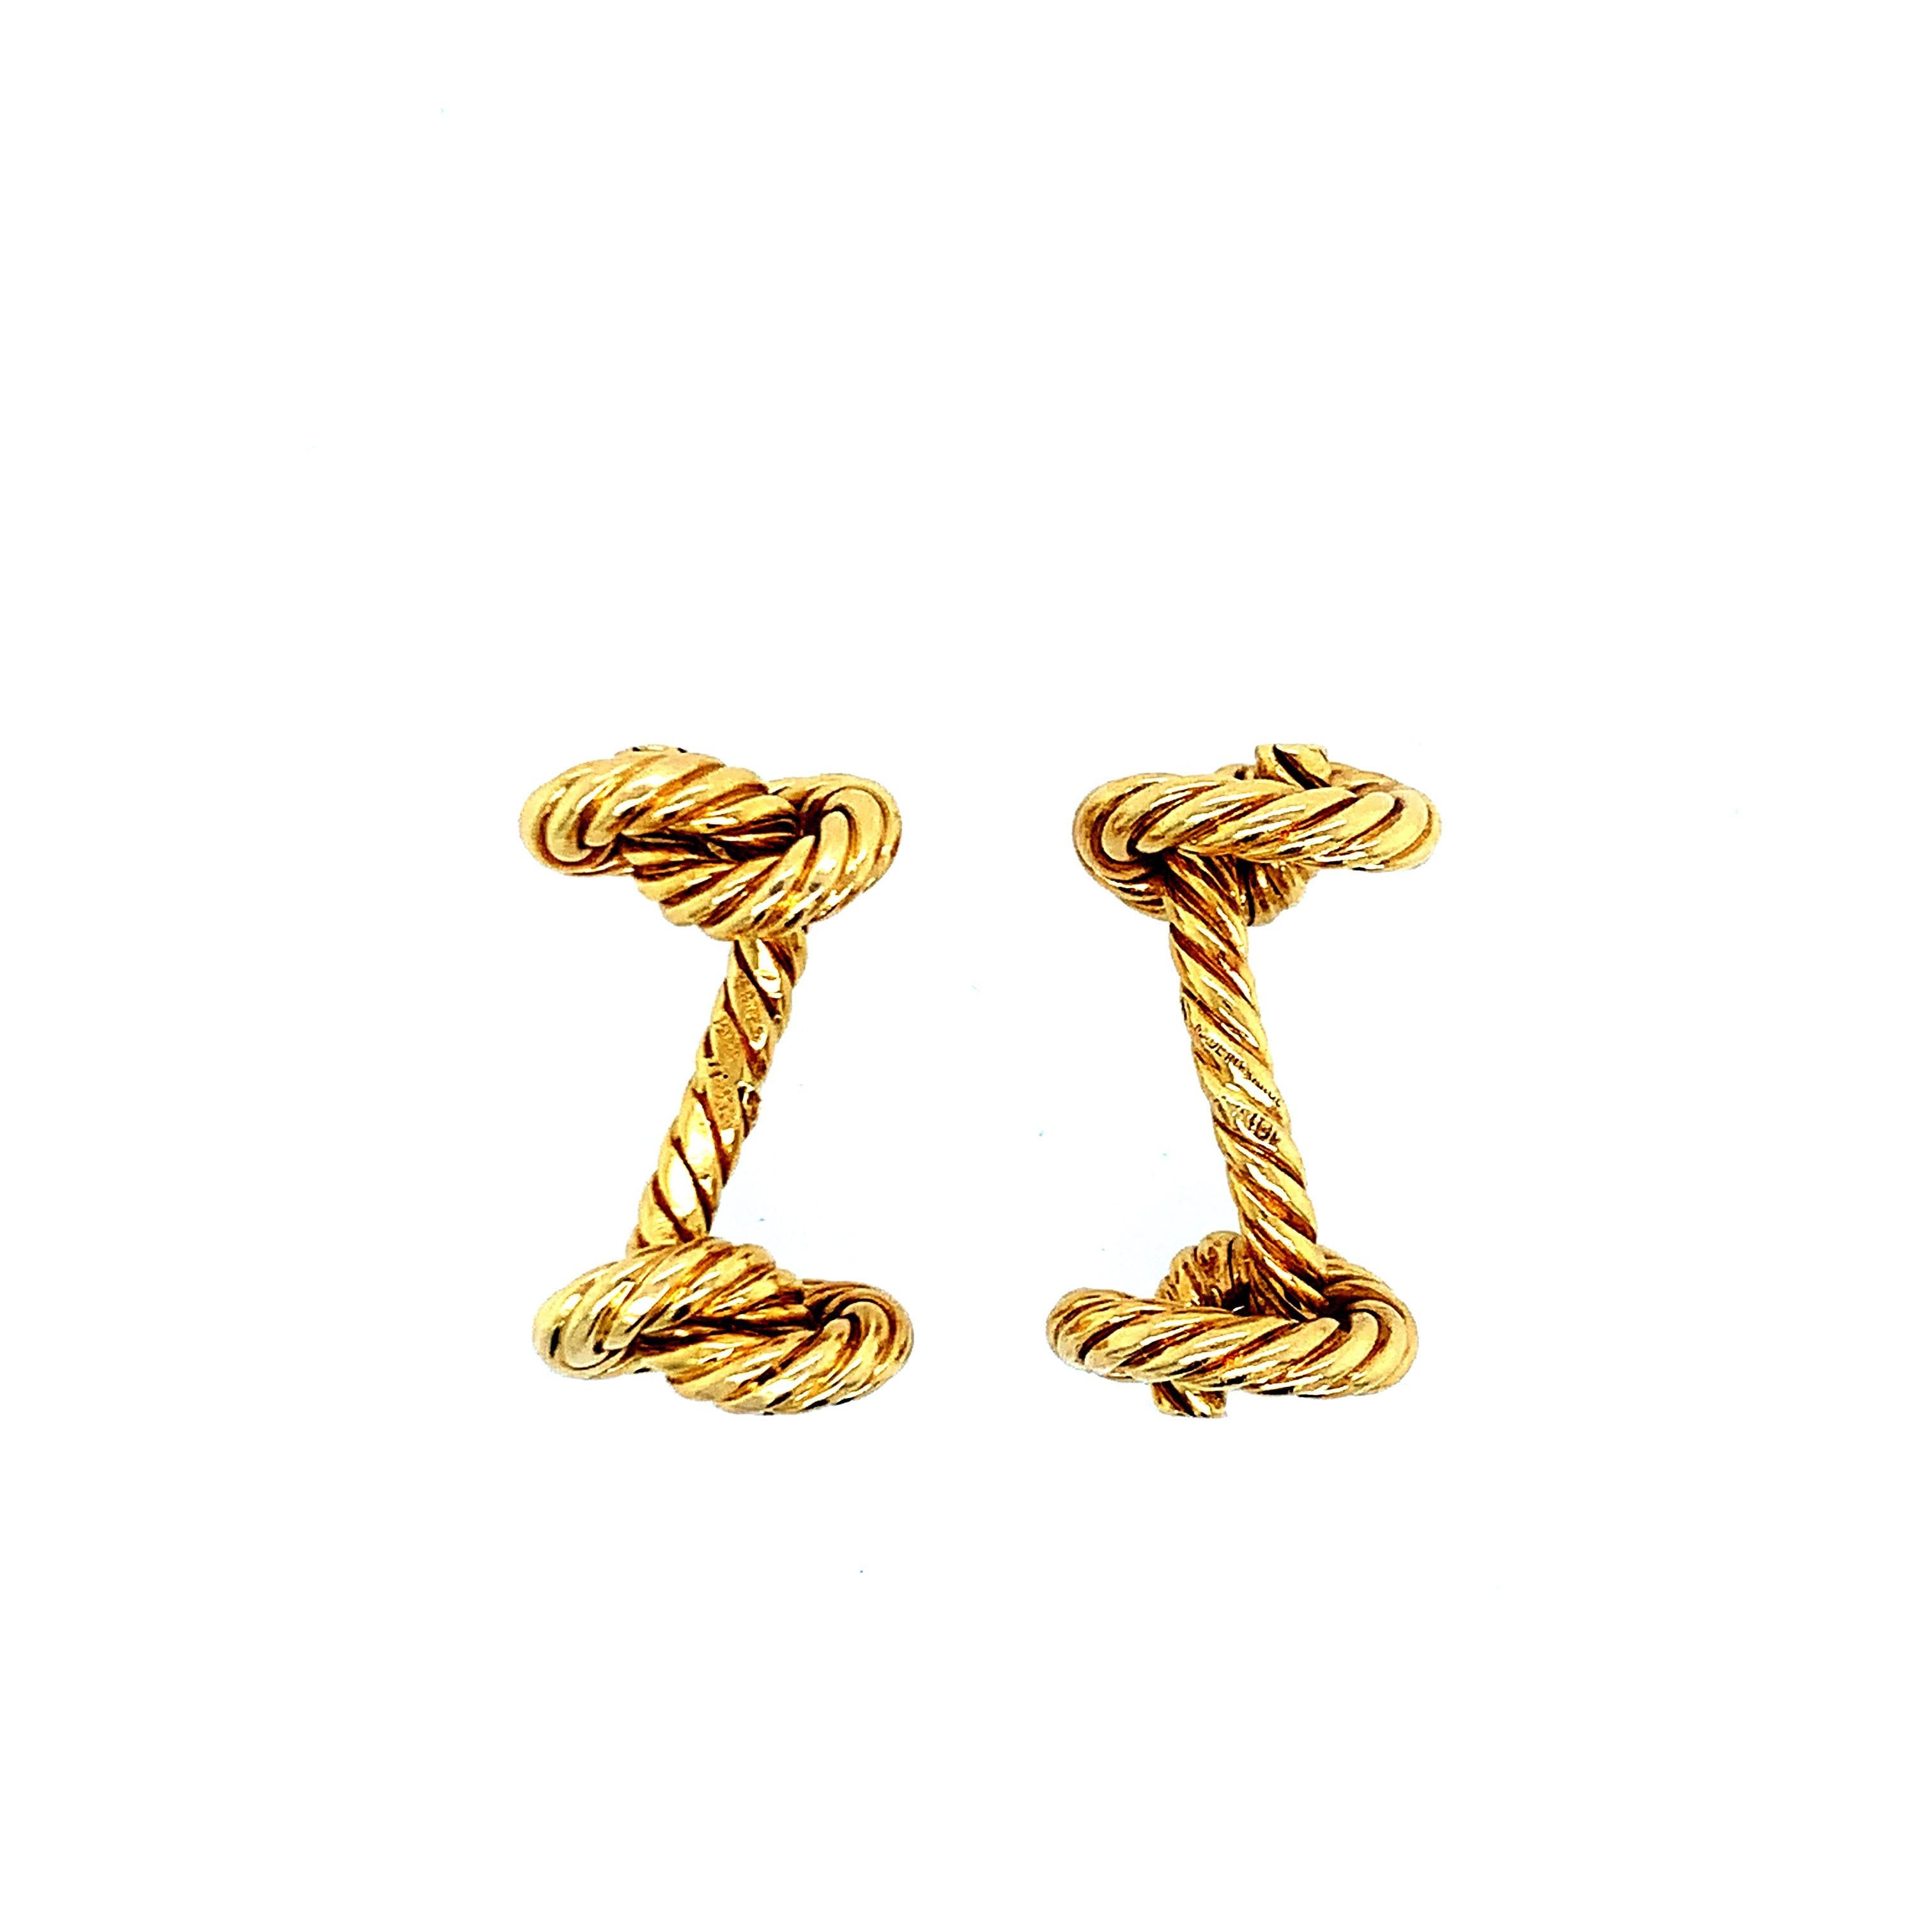 Created by Hermés, this 18 karat gold has a rope design with knots on each end. Total weight: 22.8 grams. Length: 2.7 cm. Made in Paris, France. 

Serial No. 70863.